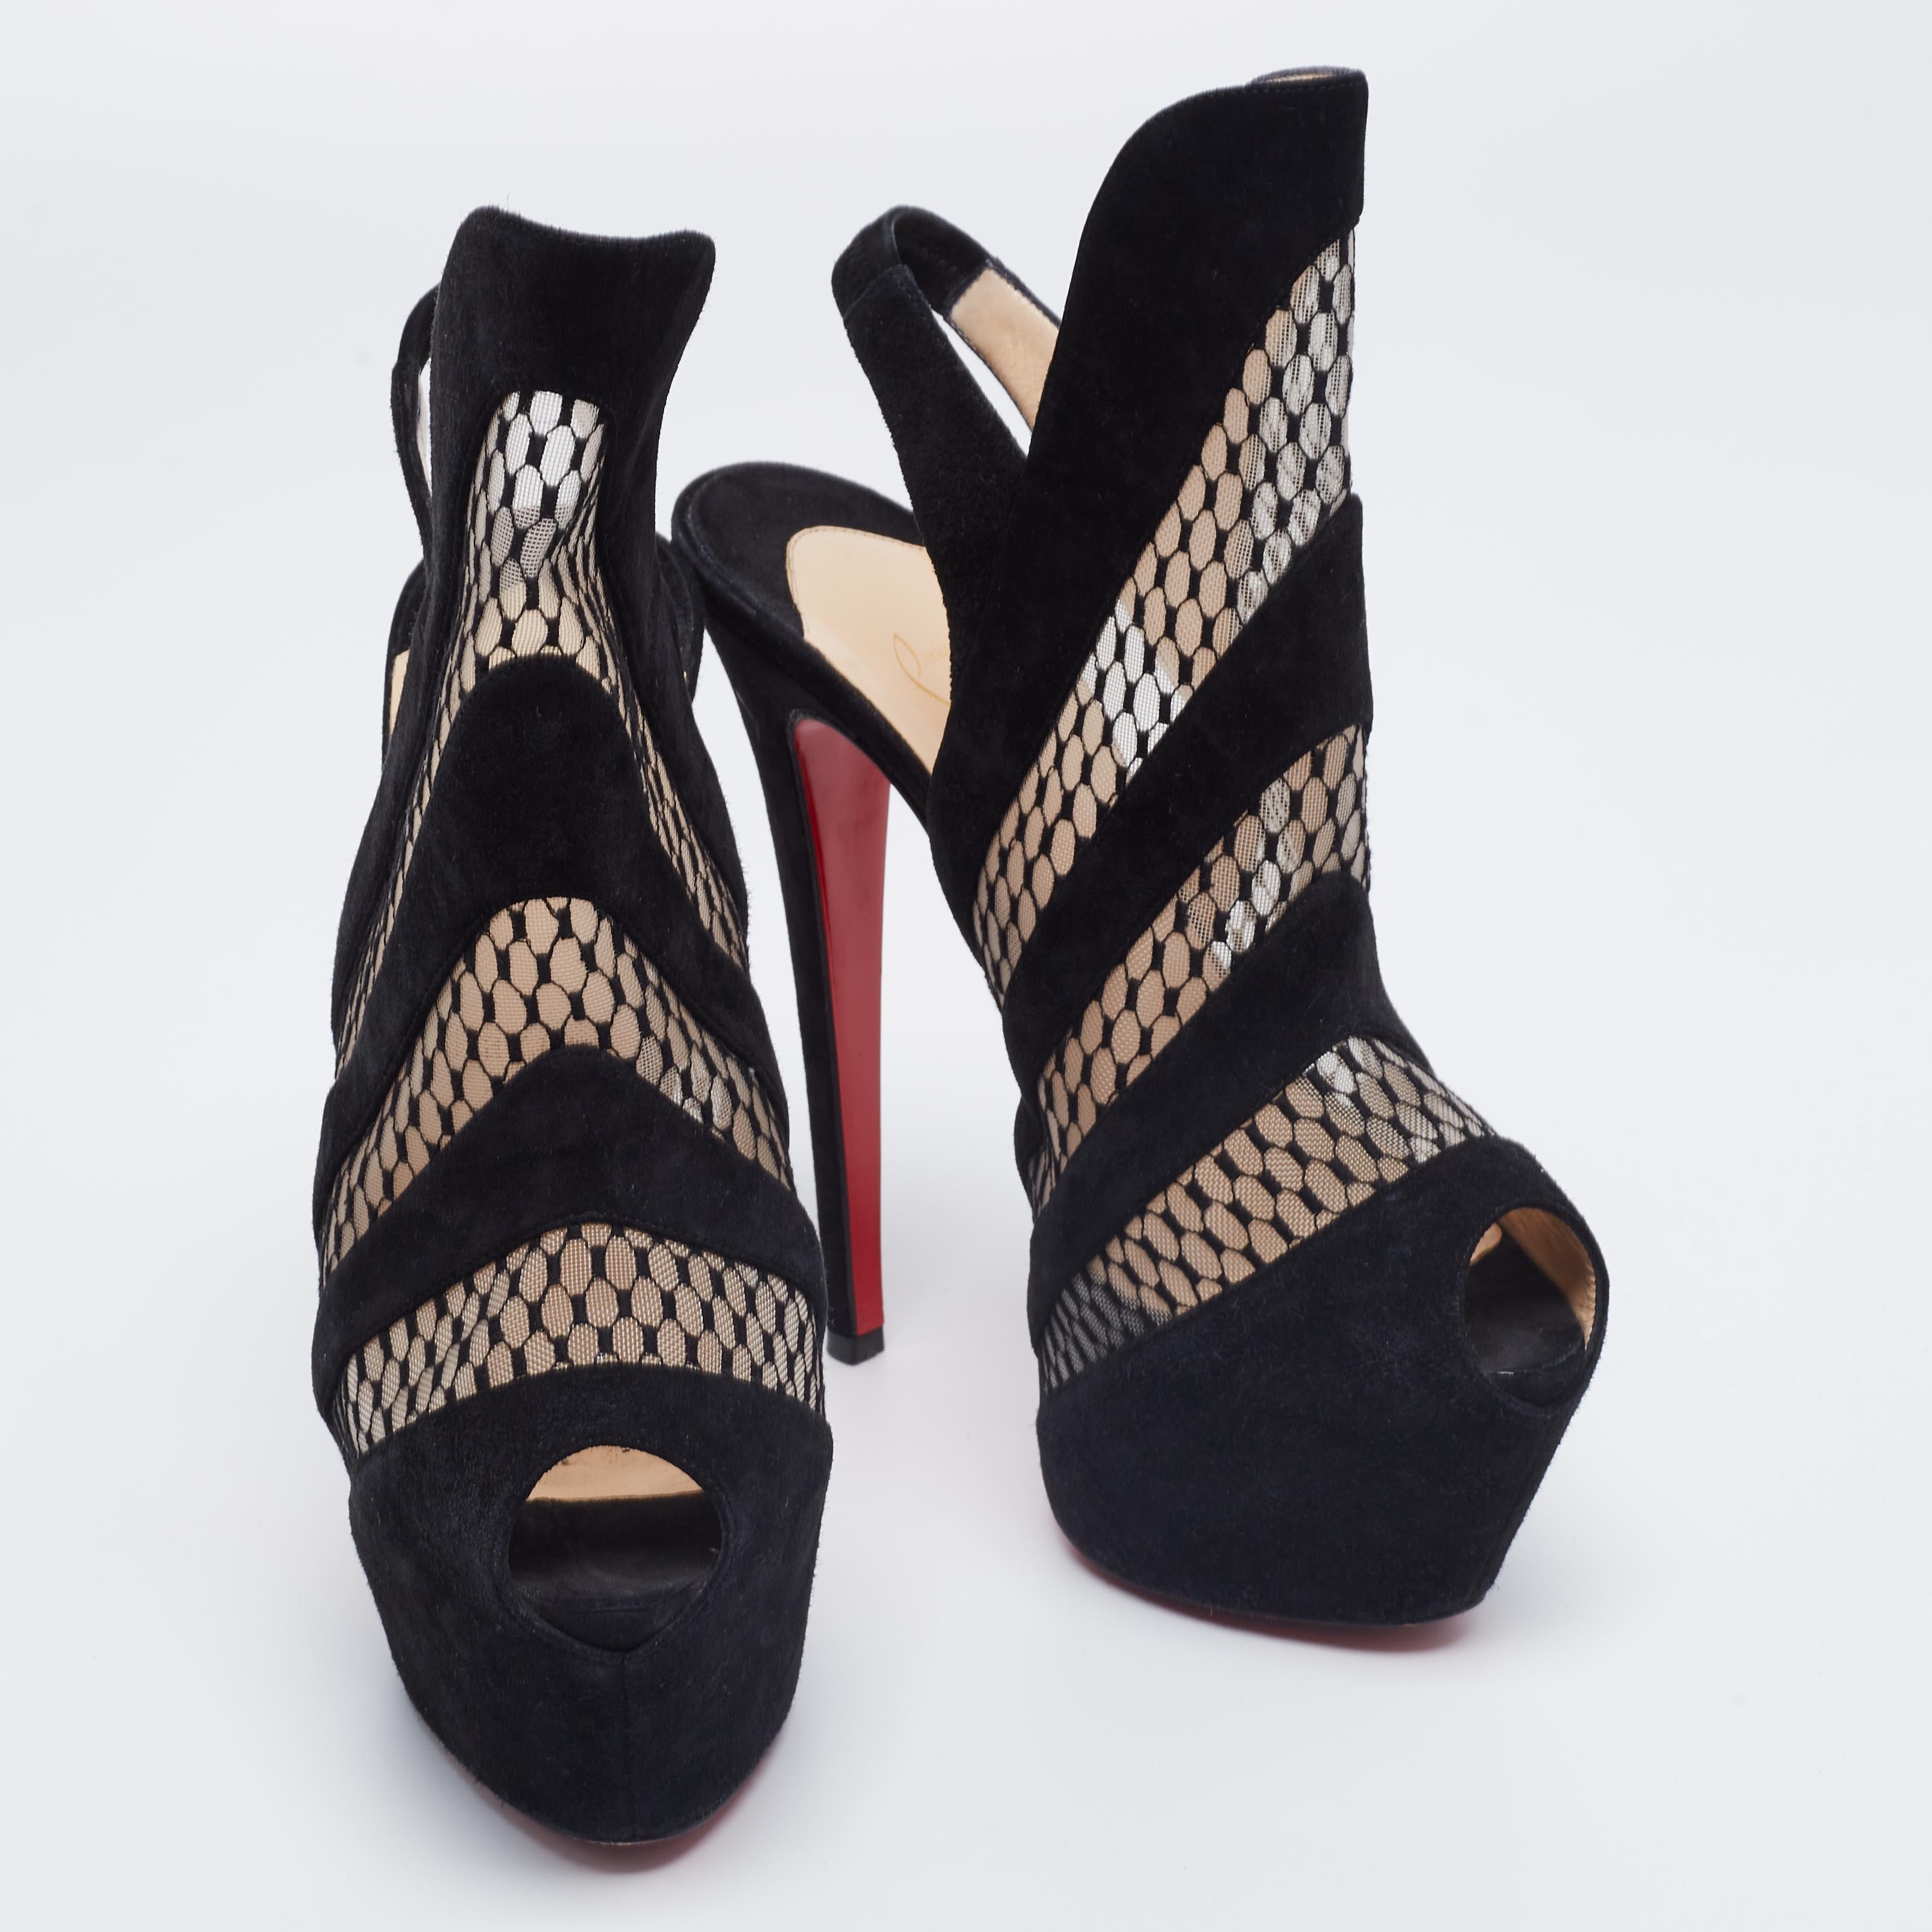 Leave behind bold and confident steps when you step out in these Christian Louboutin booties. Crafted from suede and mesh, the fishnet detailing will beautifully frame your feet and the slingback closure will offer the perfect fit. The 15.5cm heels